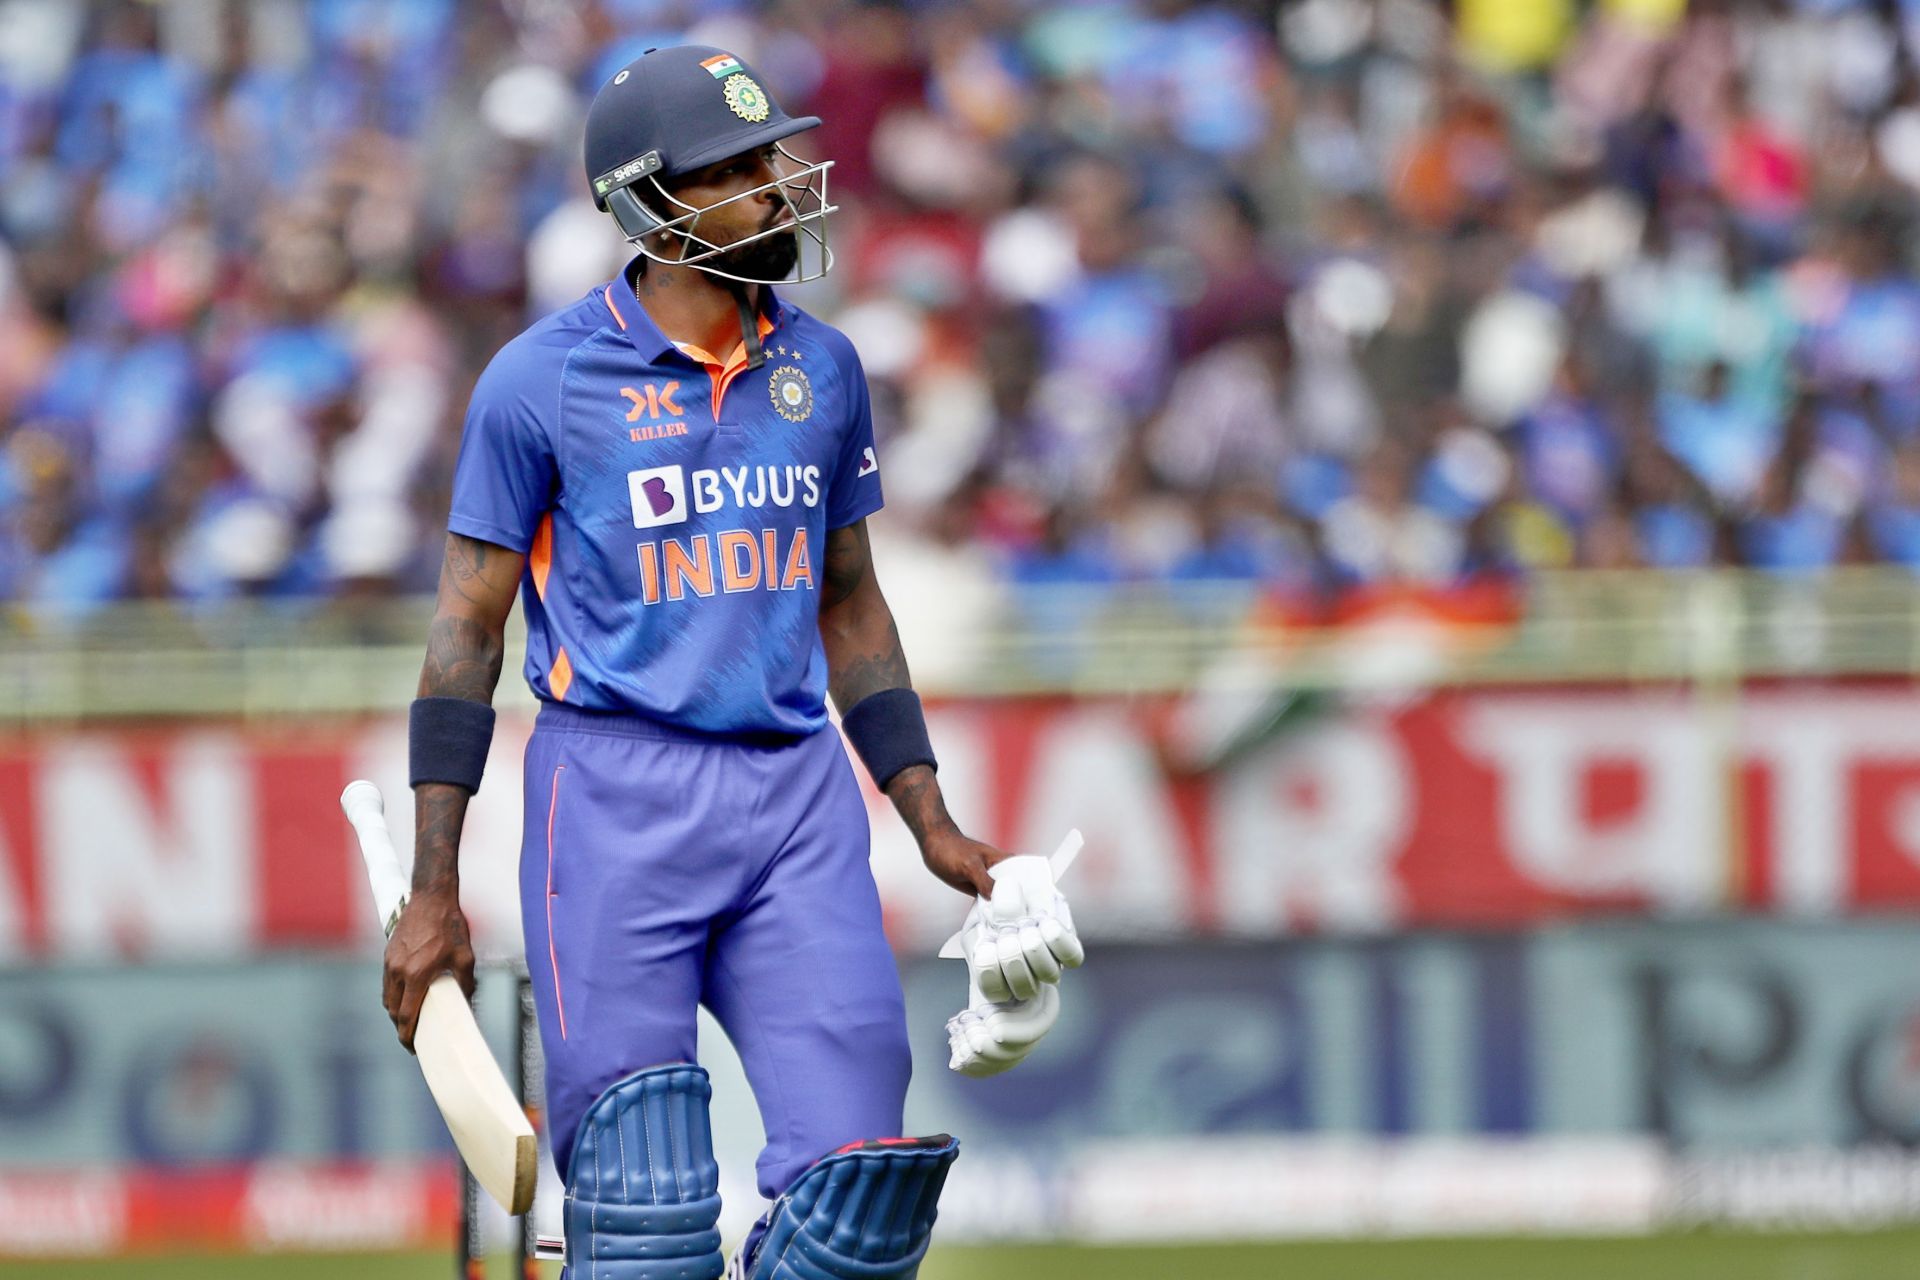 Hardik Pandya was dismissed cheaply in the first two ODIs.